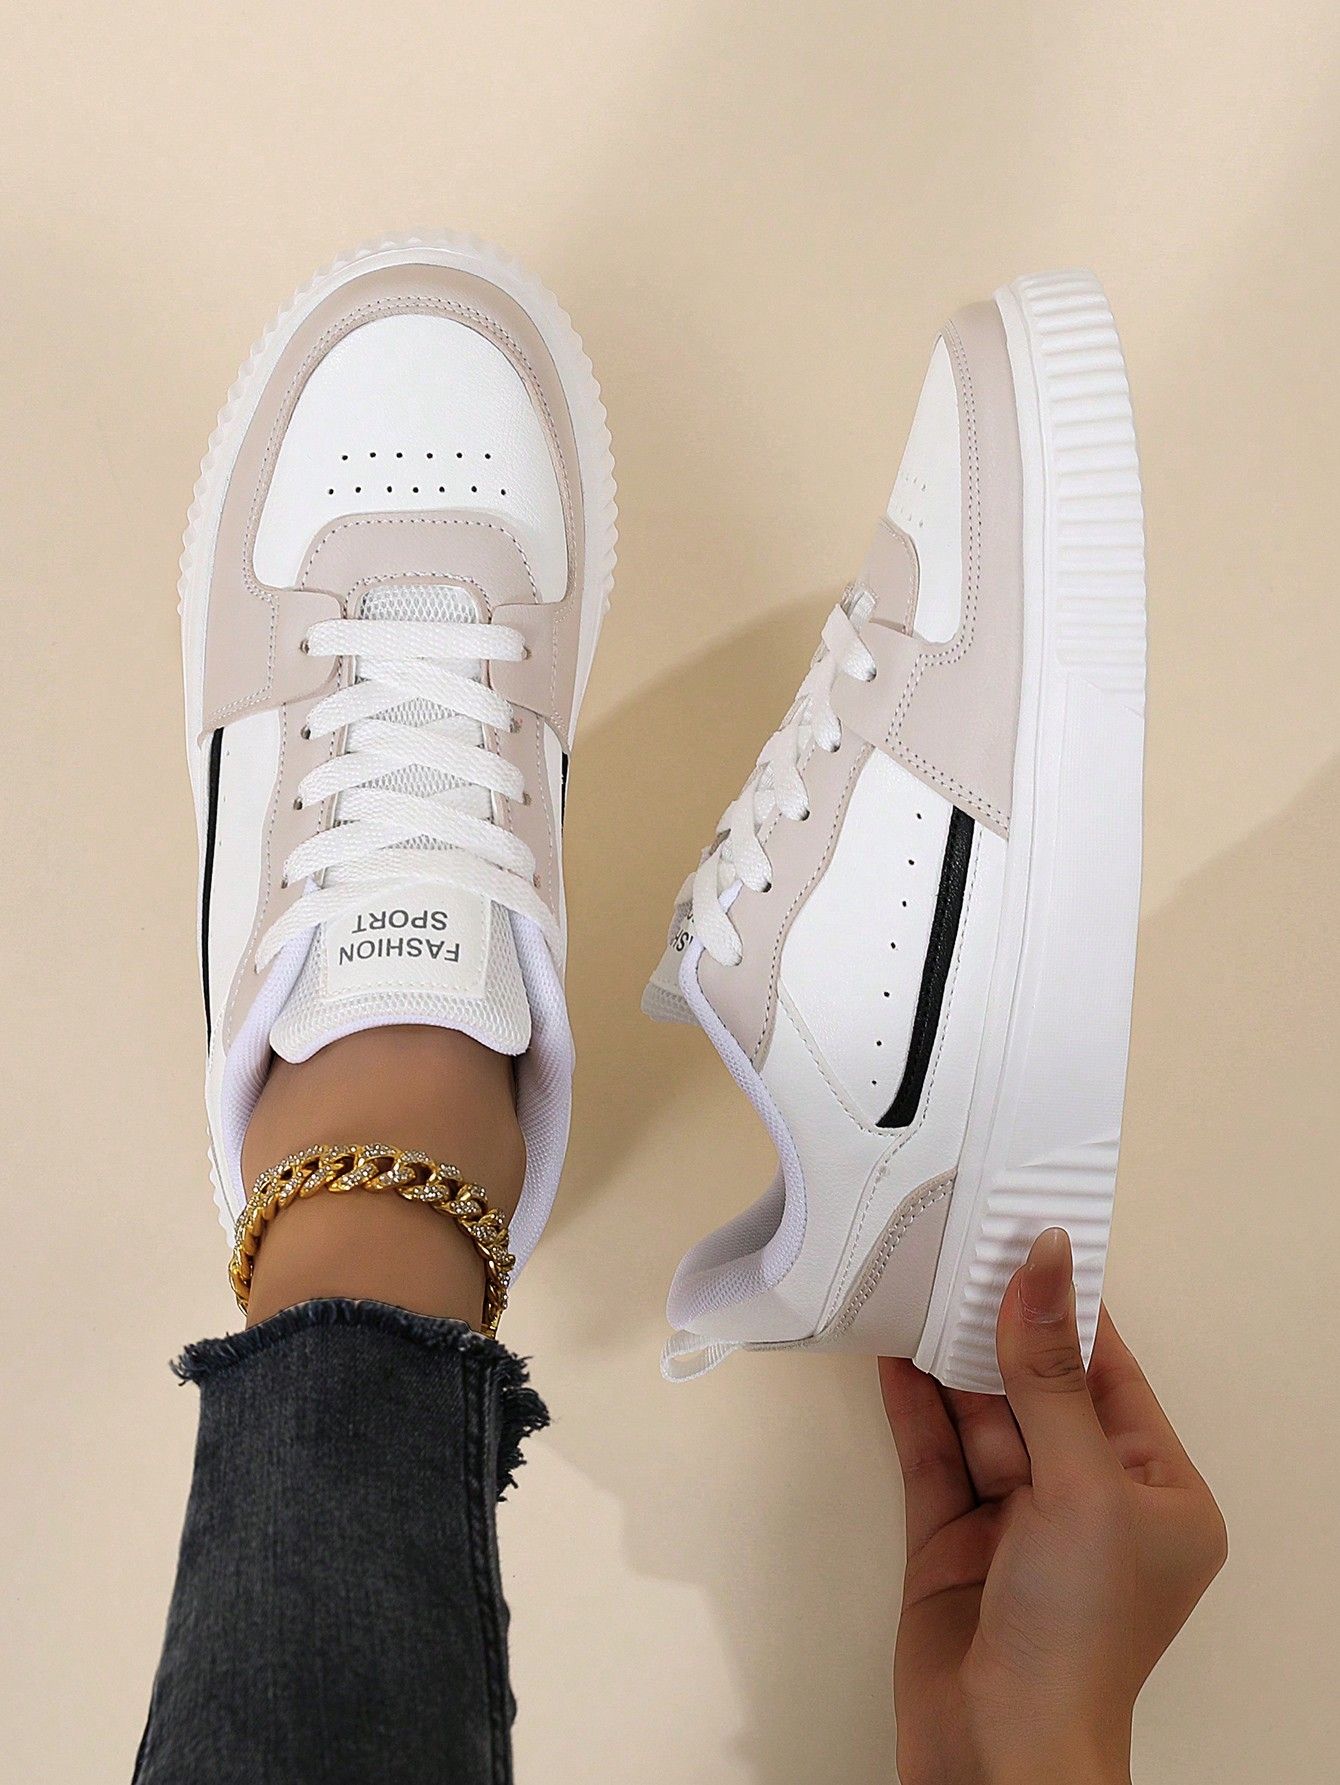 Women's Lace-up Casual Sport Shoes White Sneakers Skateboarding Shoes, Lightweight For Street | SHEIN